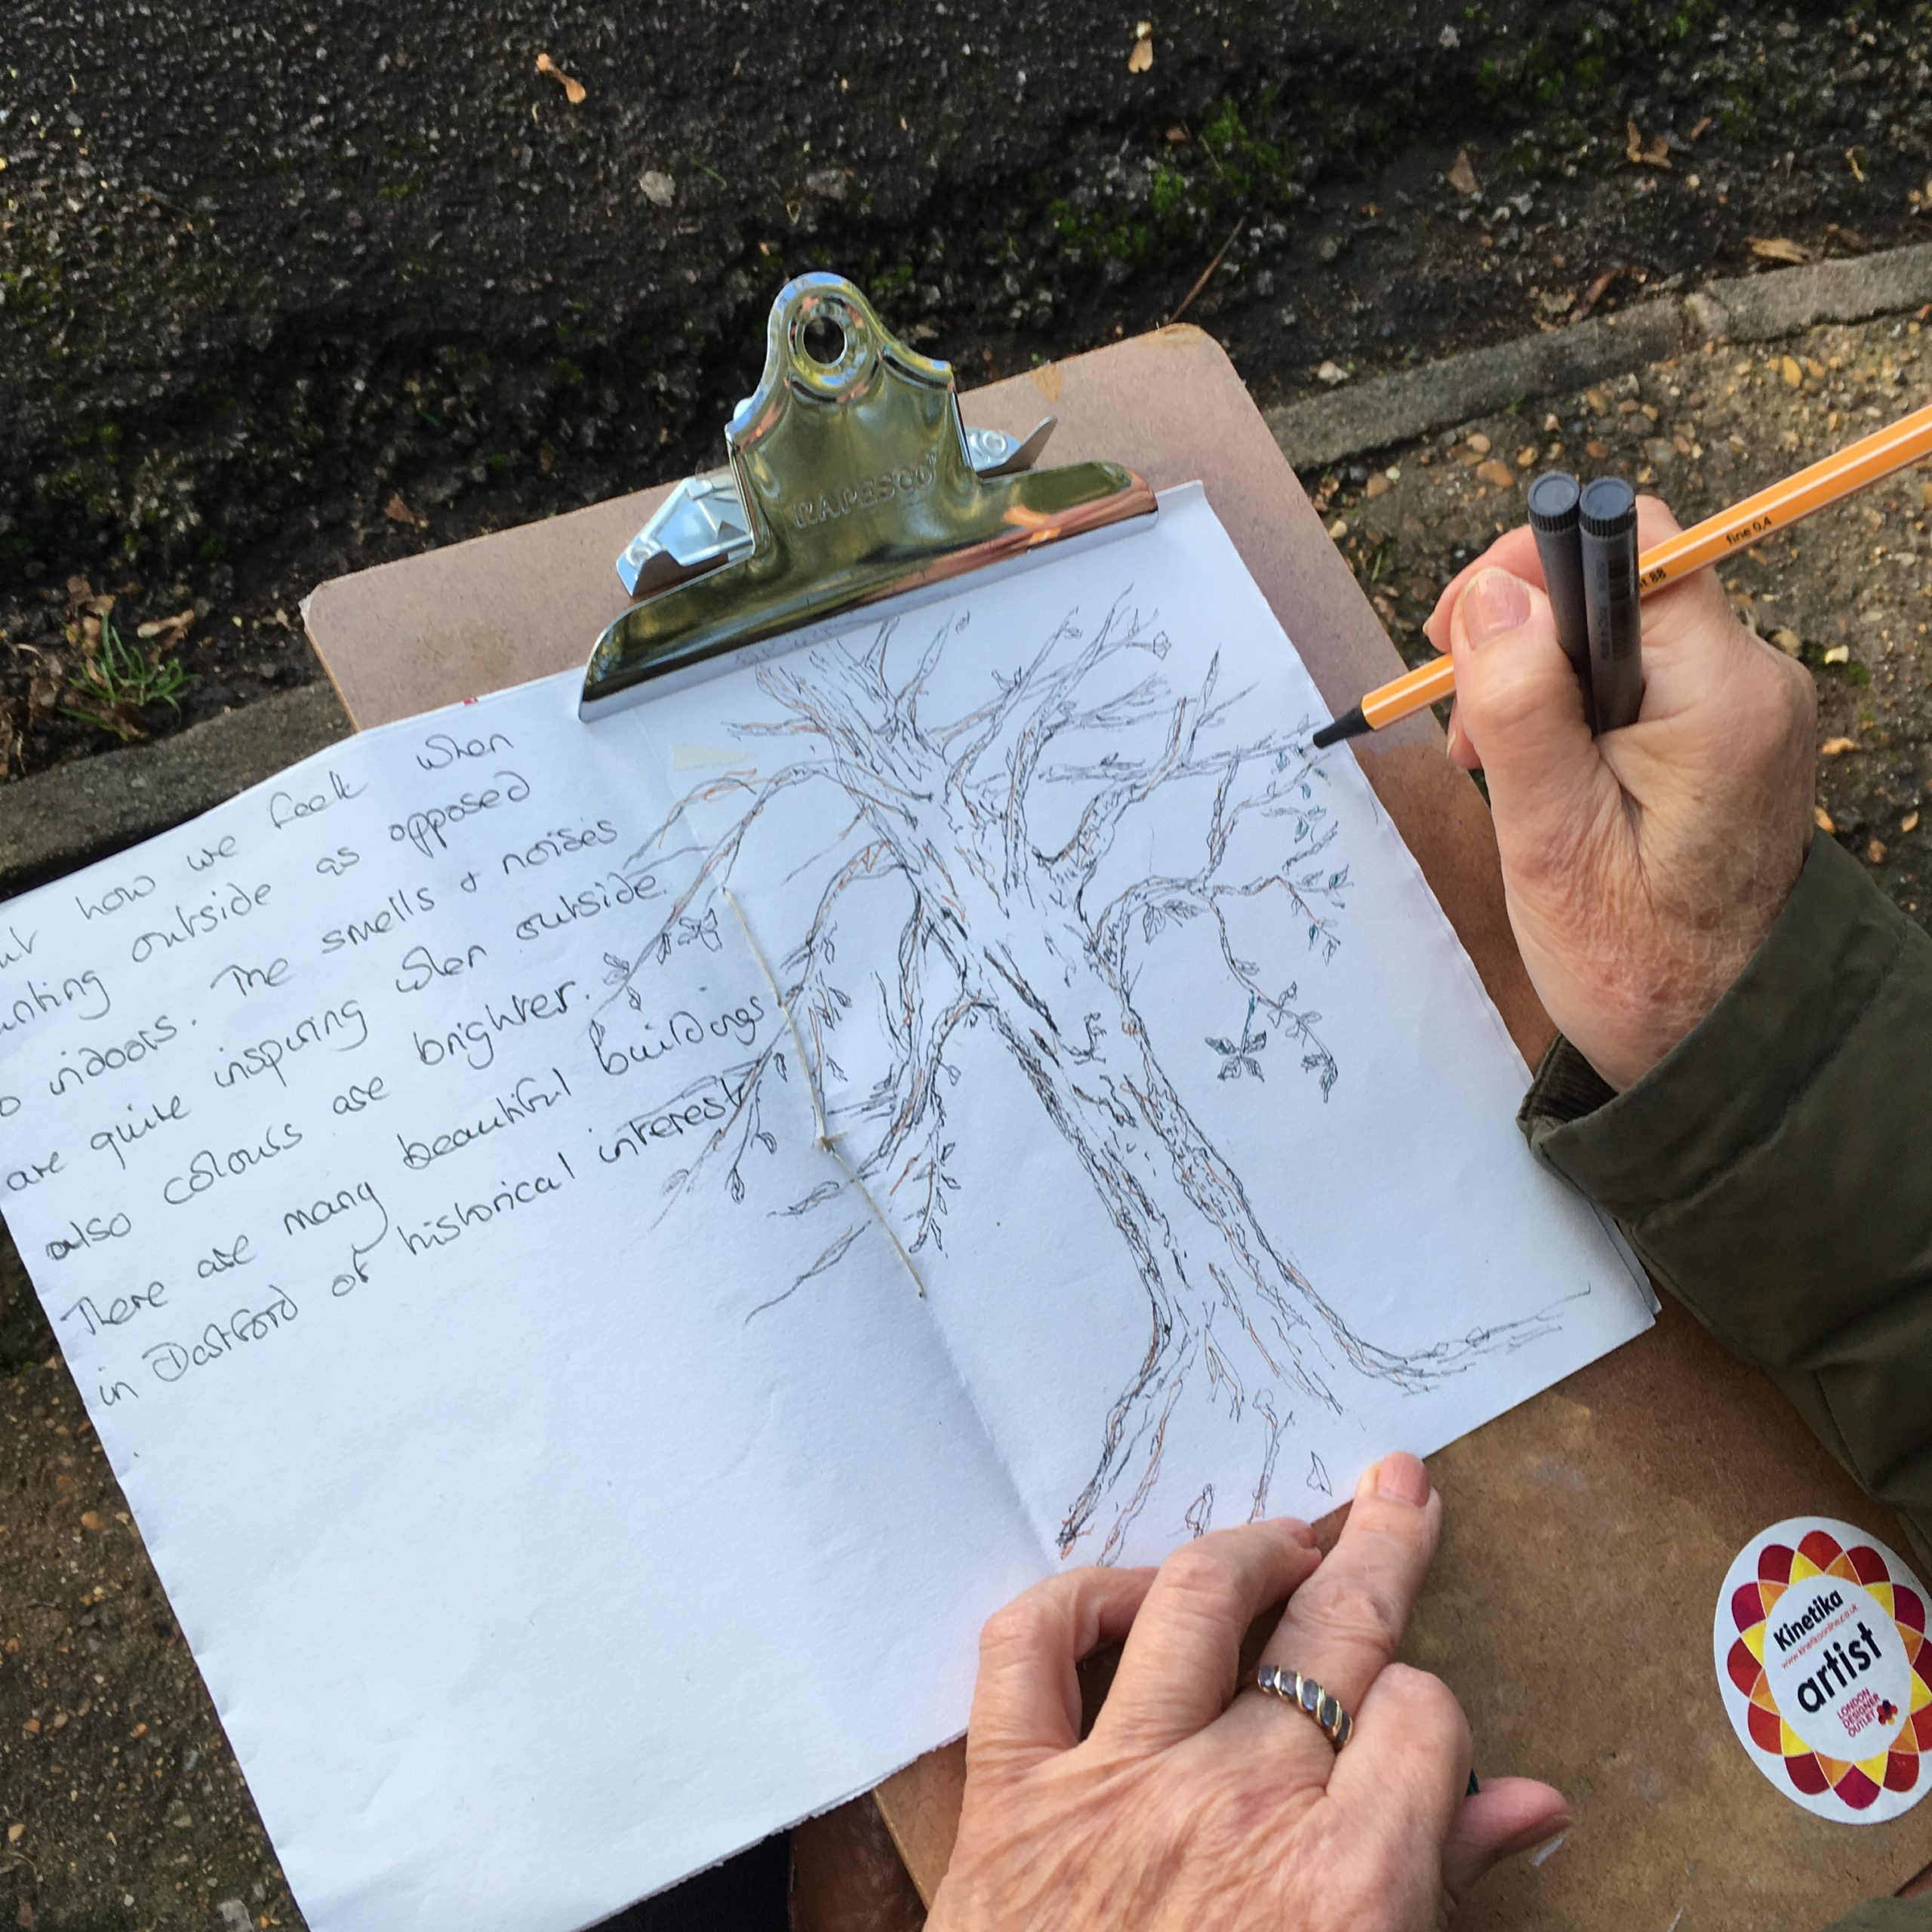 Book with sketched picture of tree and writing